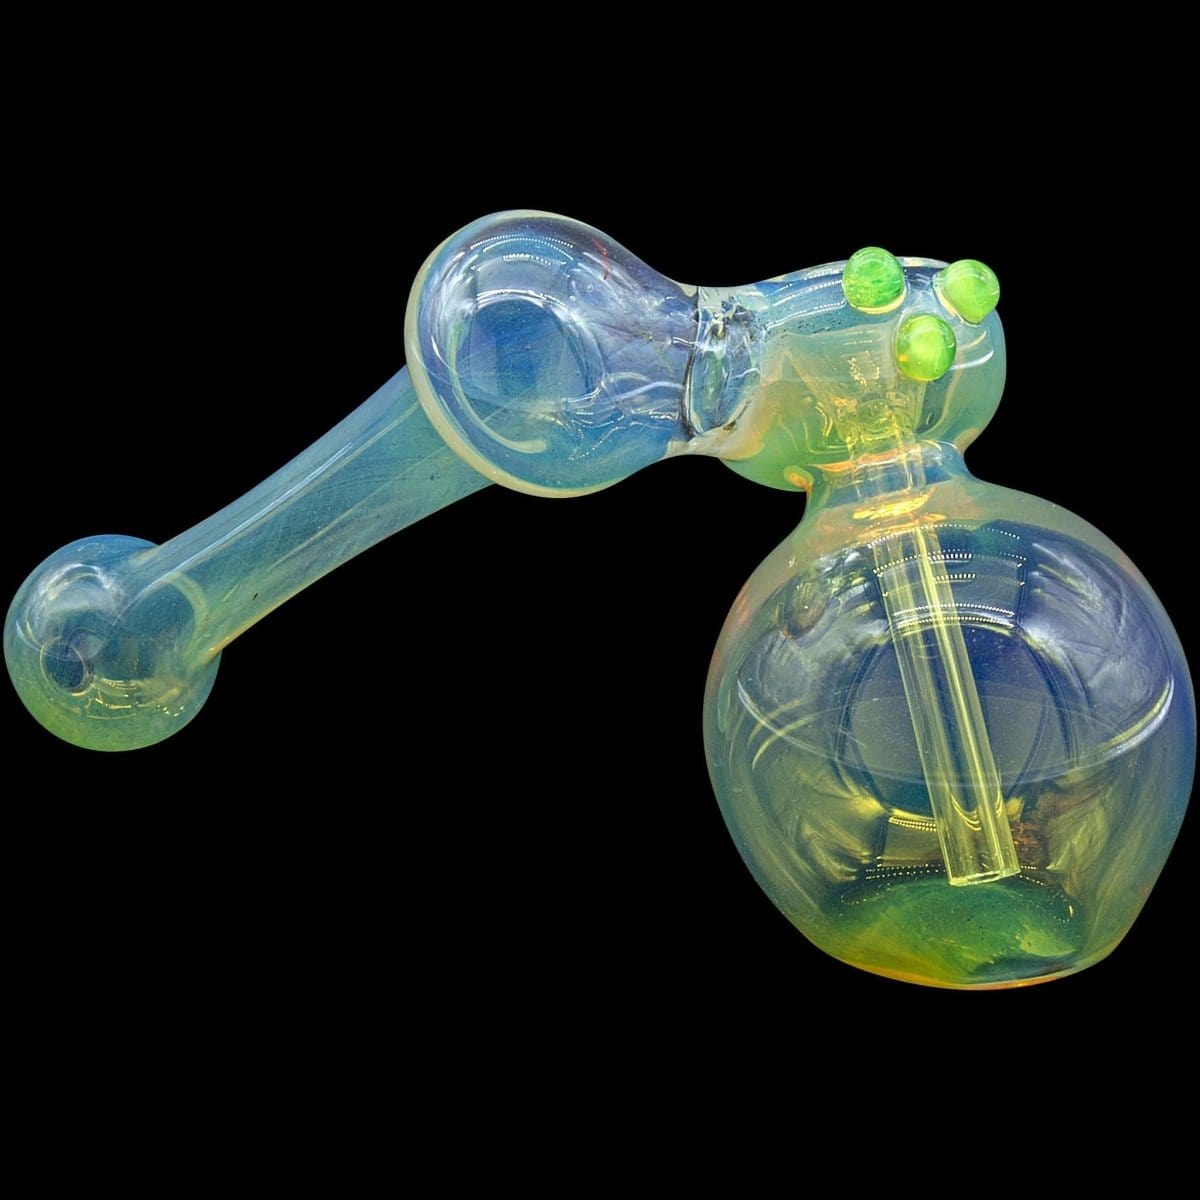 LA Pipes Bubbler Green Slime "Silver Sidecar" Fumed Hammer Sidecar Pipe (Various Colors)